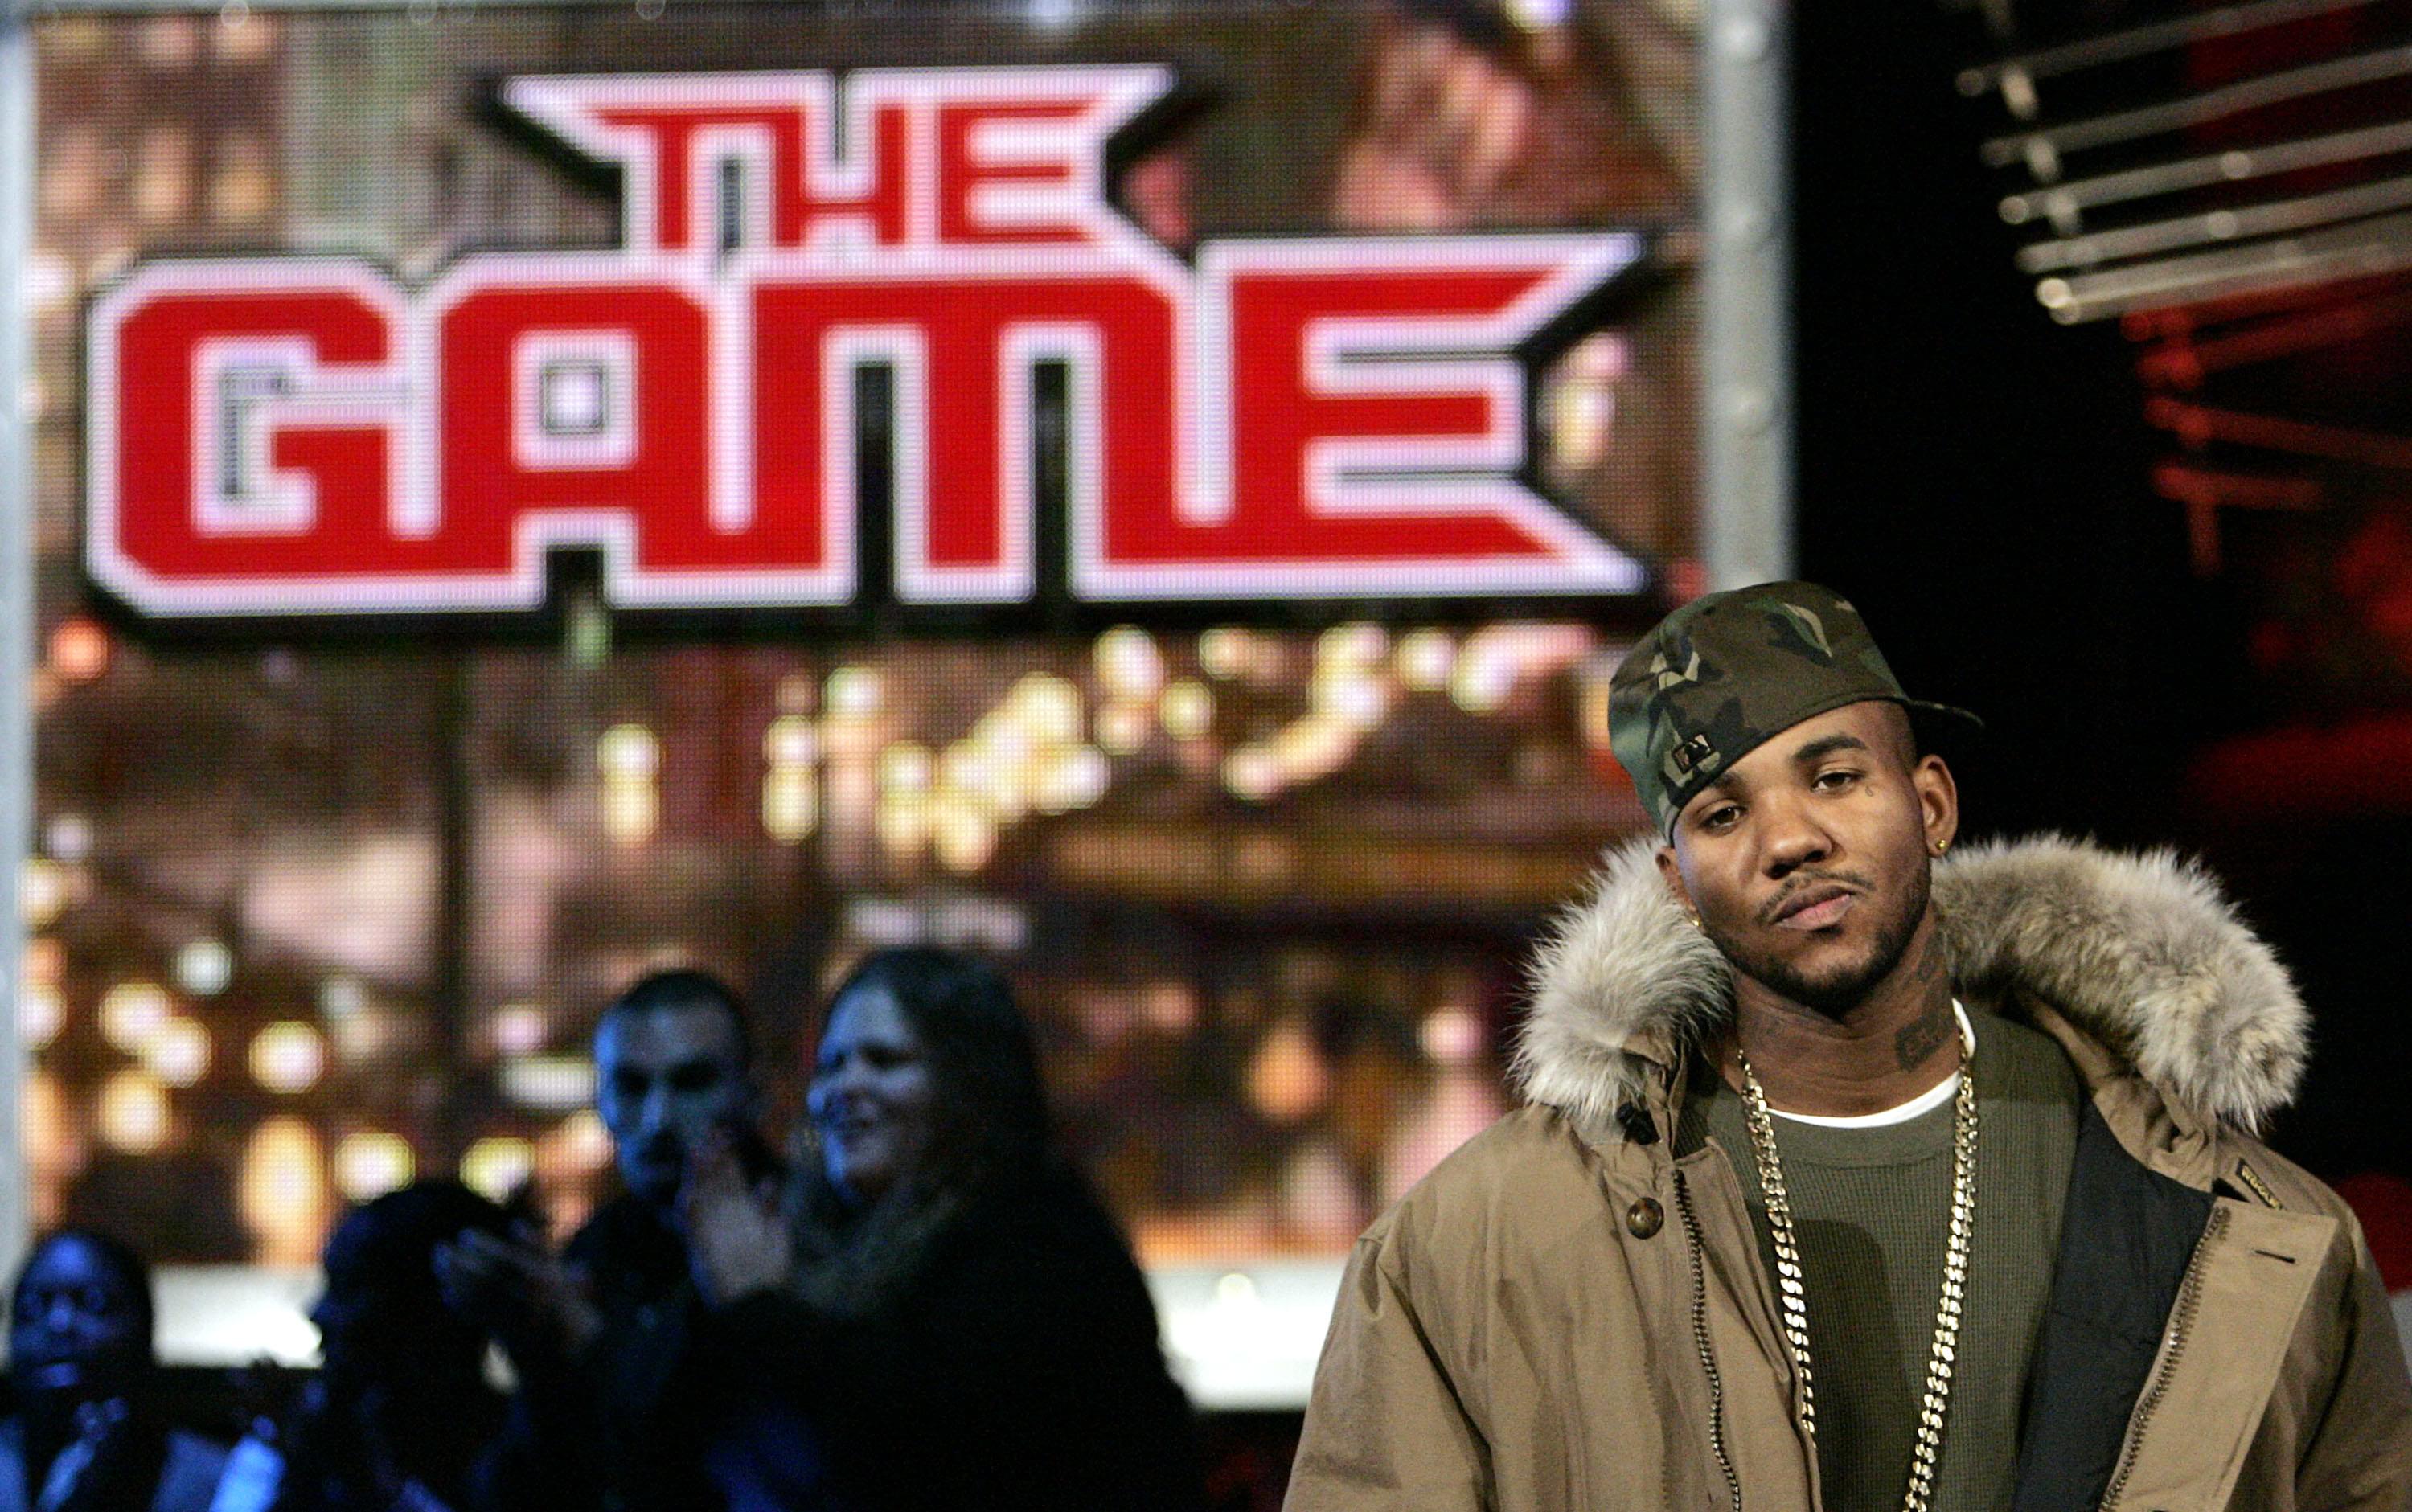 The Game Says the Music Industry Will Be Exposed in New Album